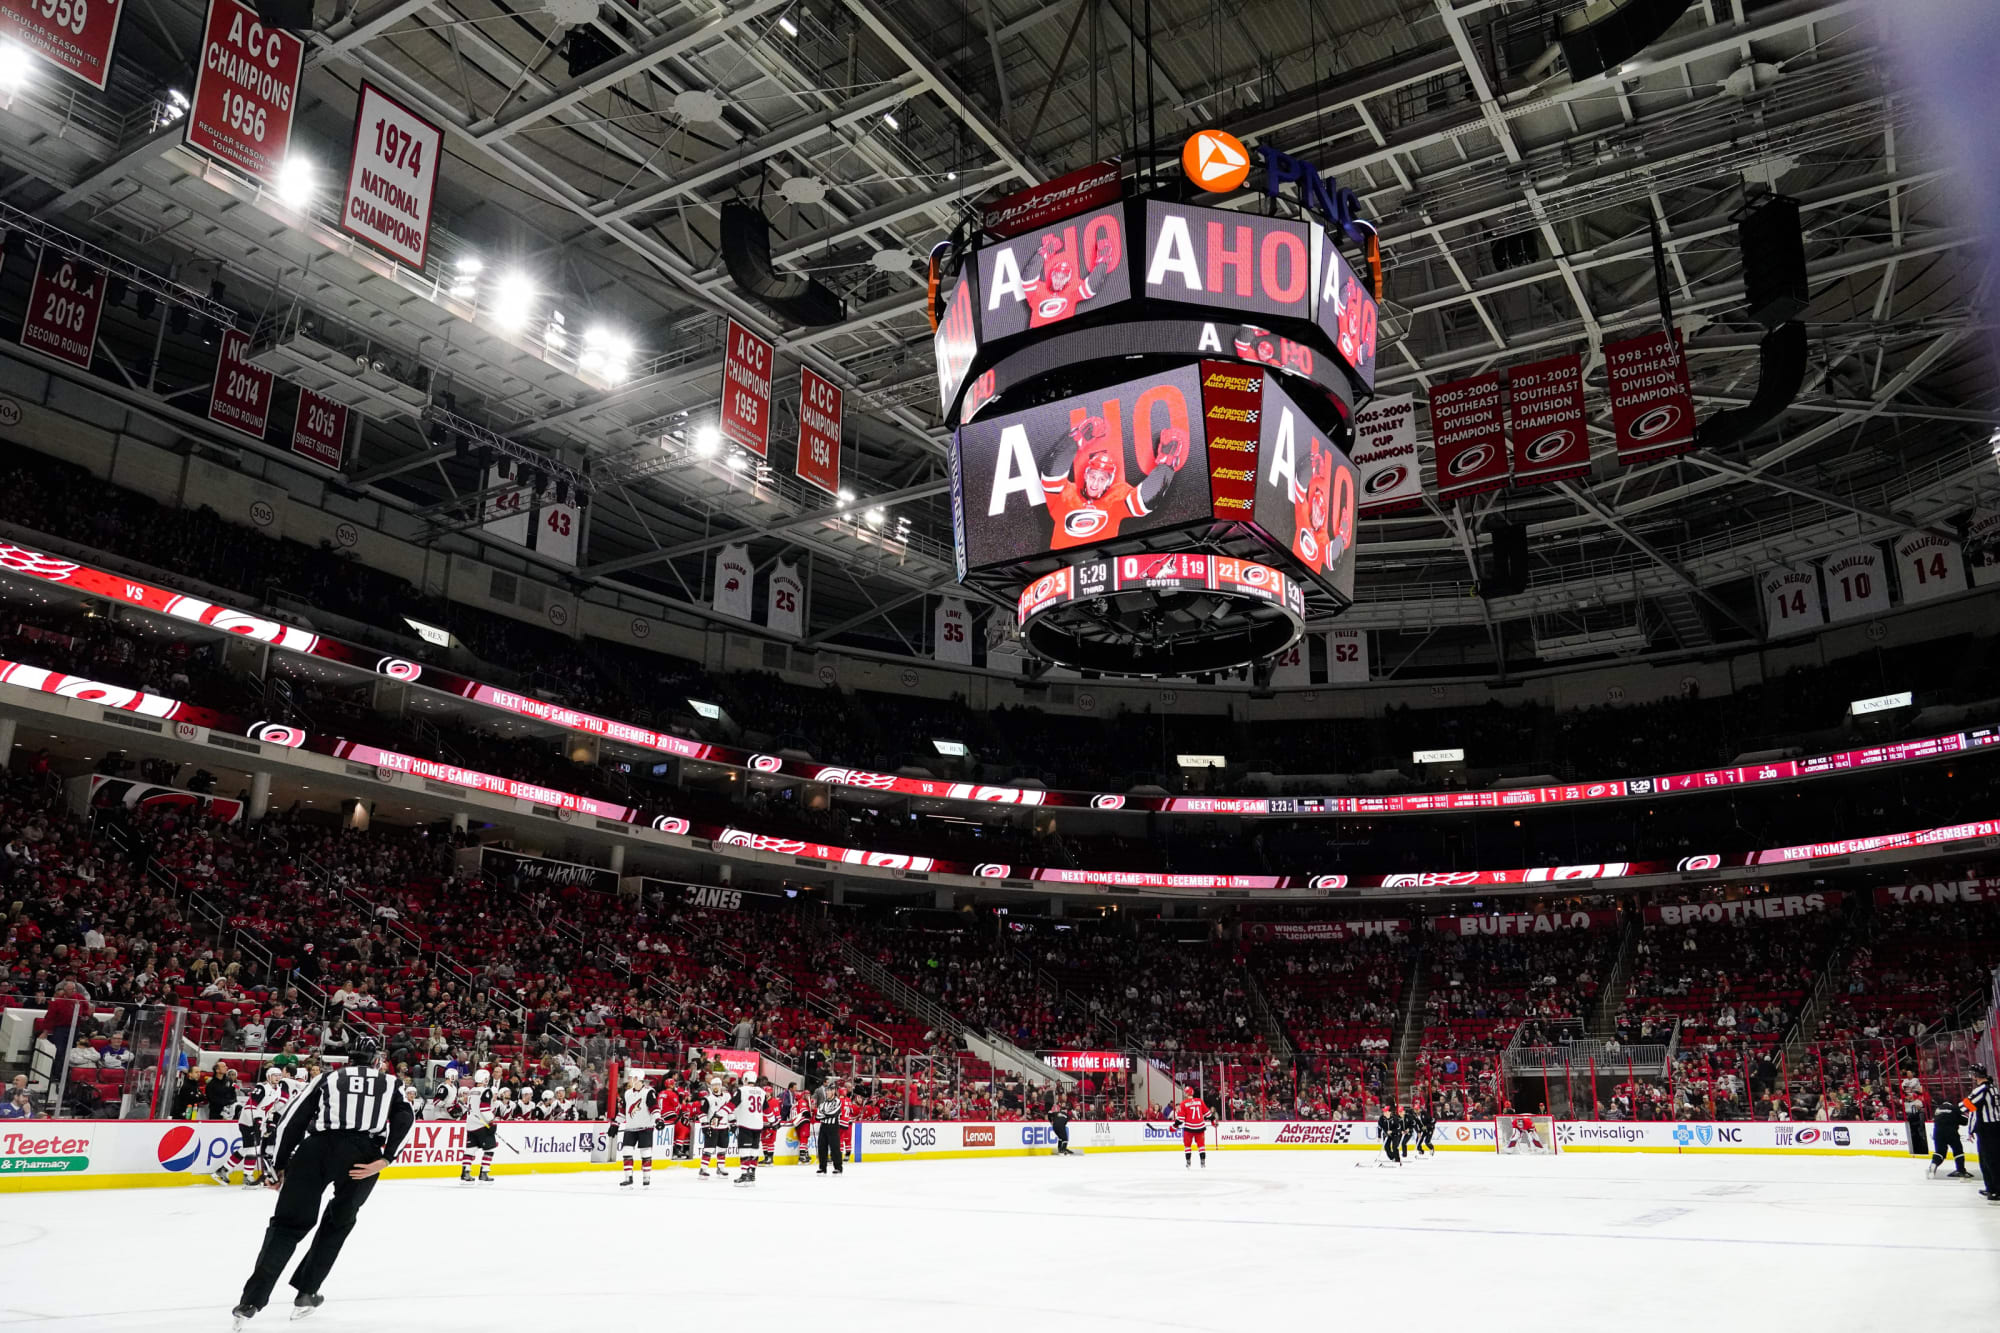 Carolina Hurricanes Attendance at PNC Arena on the rise